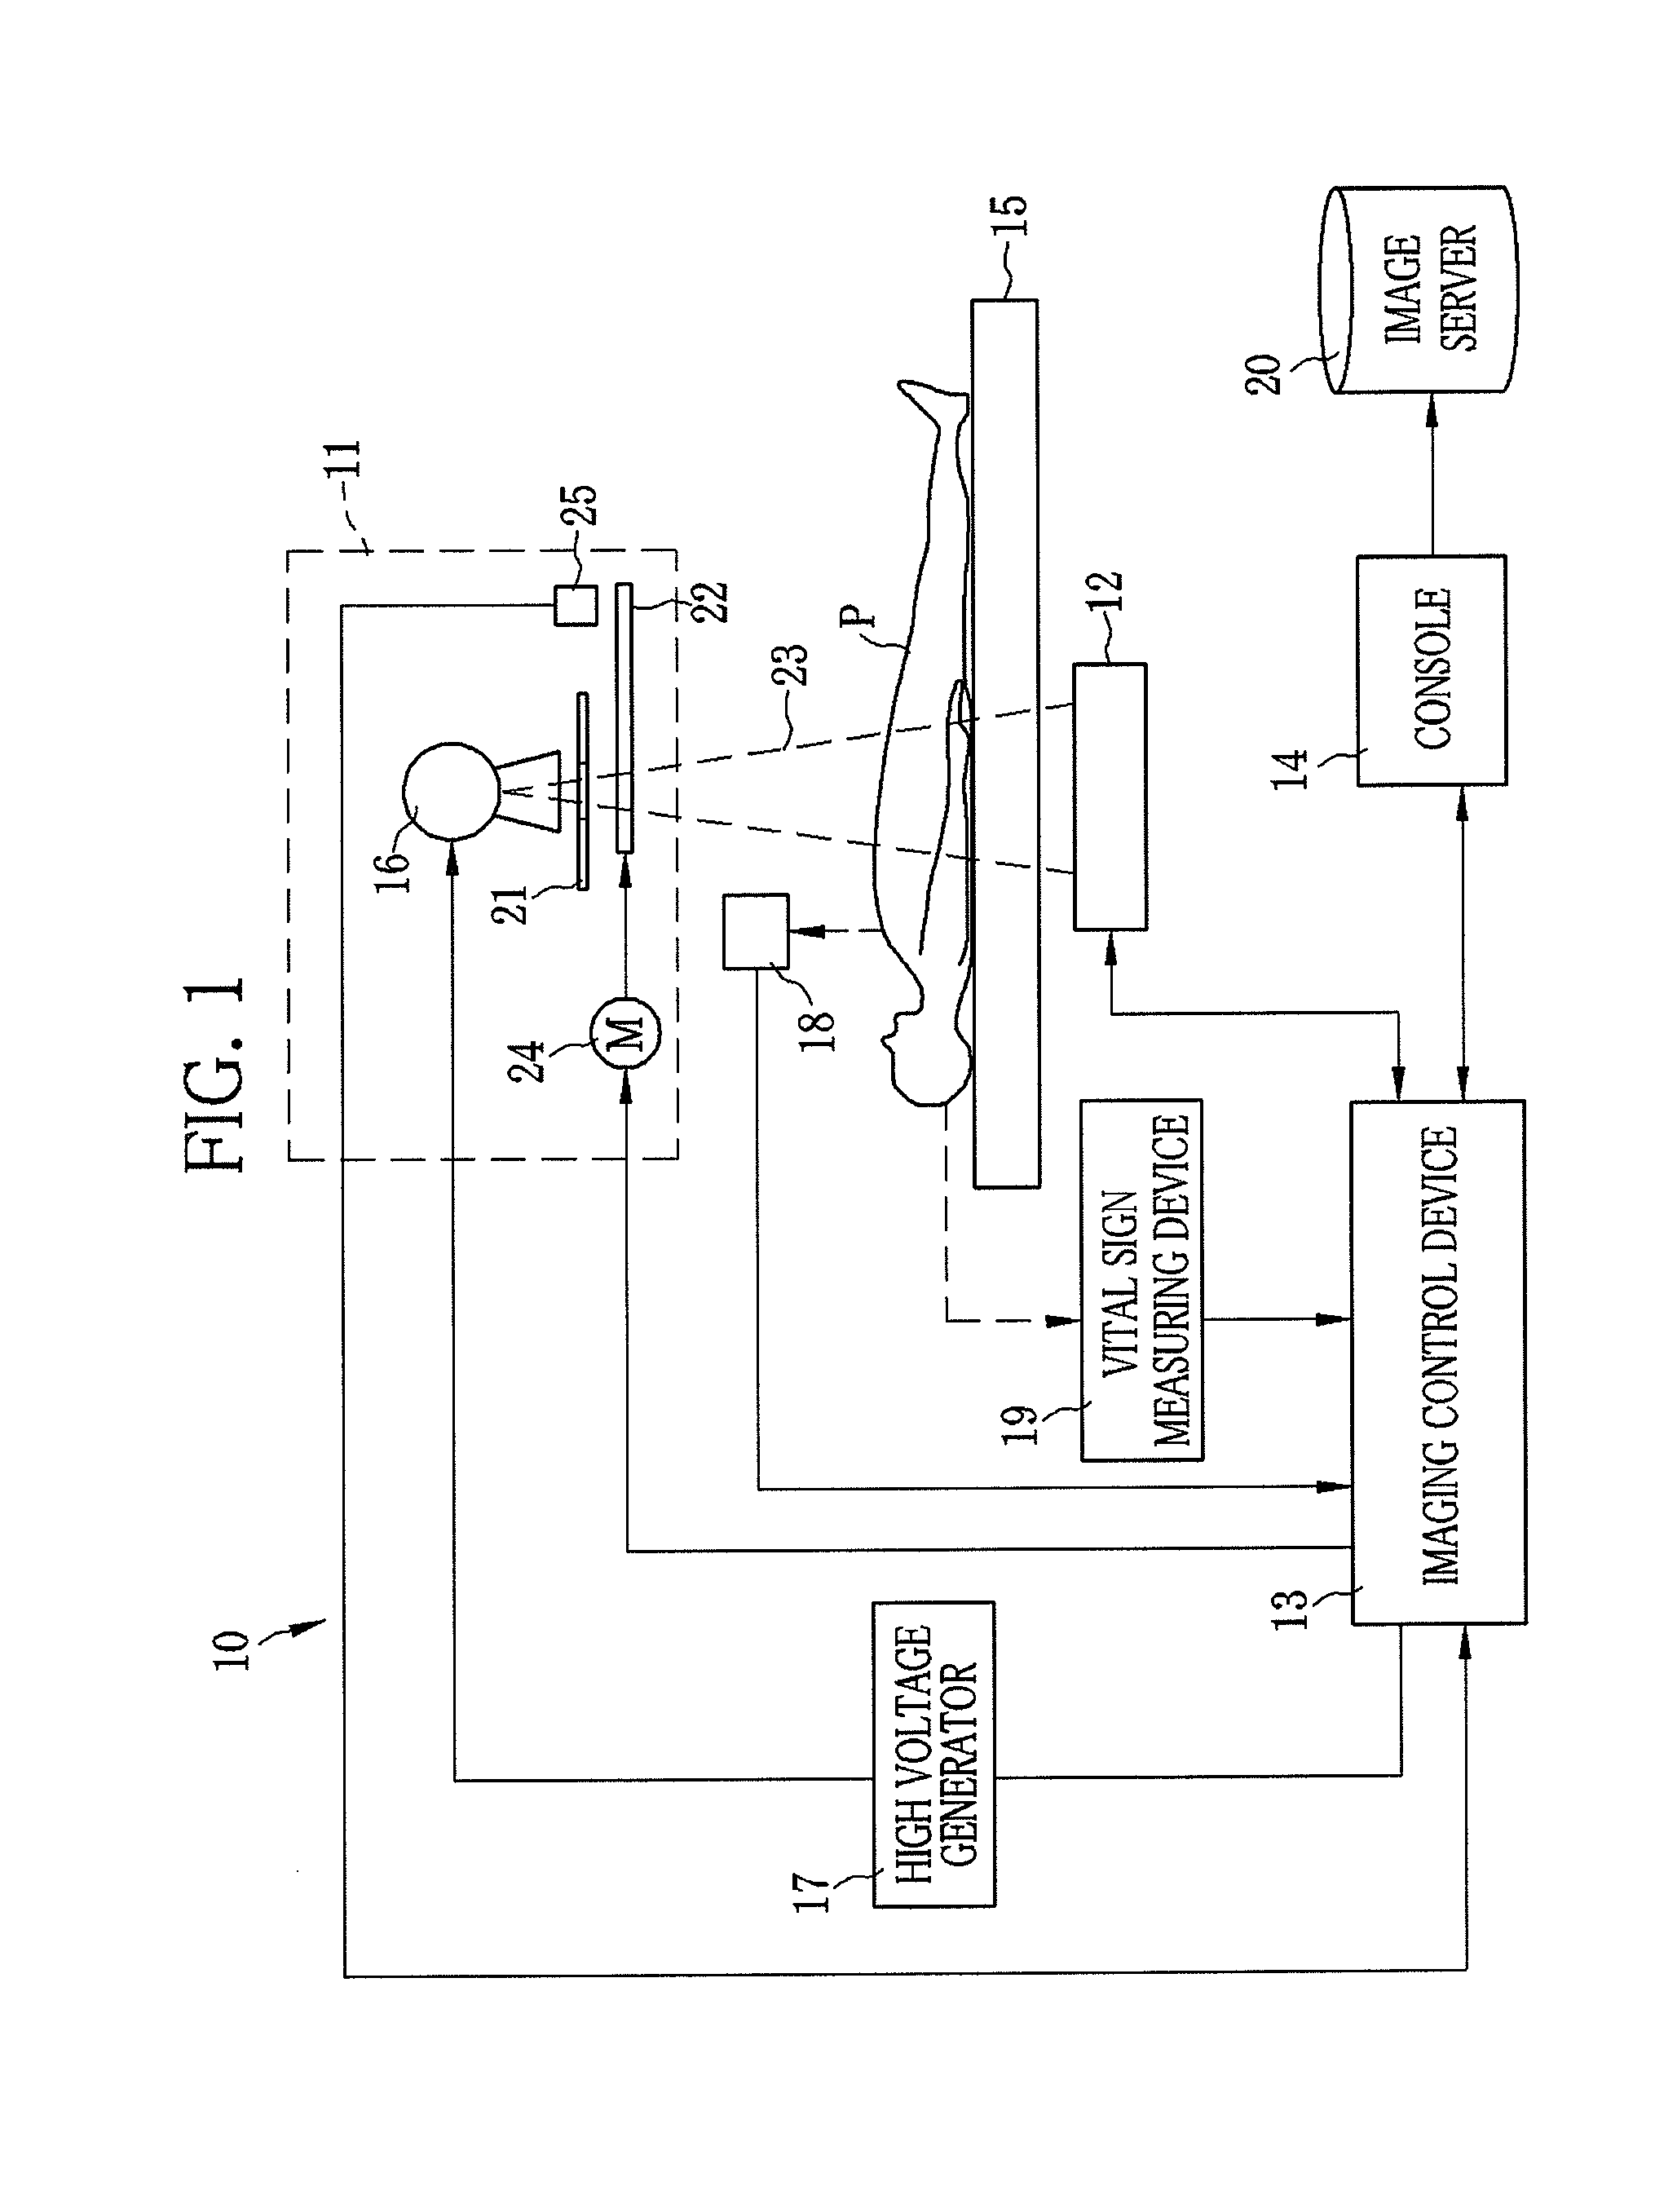 Radiation imaging apparatus and imaging control device controlling a filter based on subject information